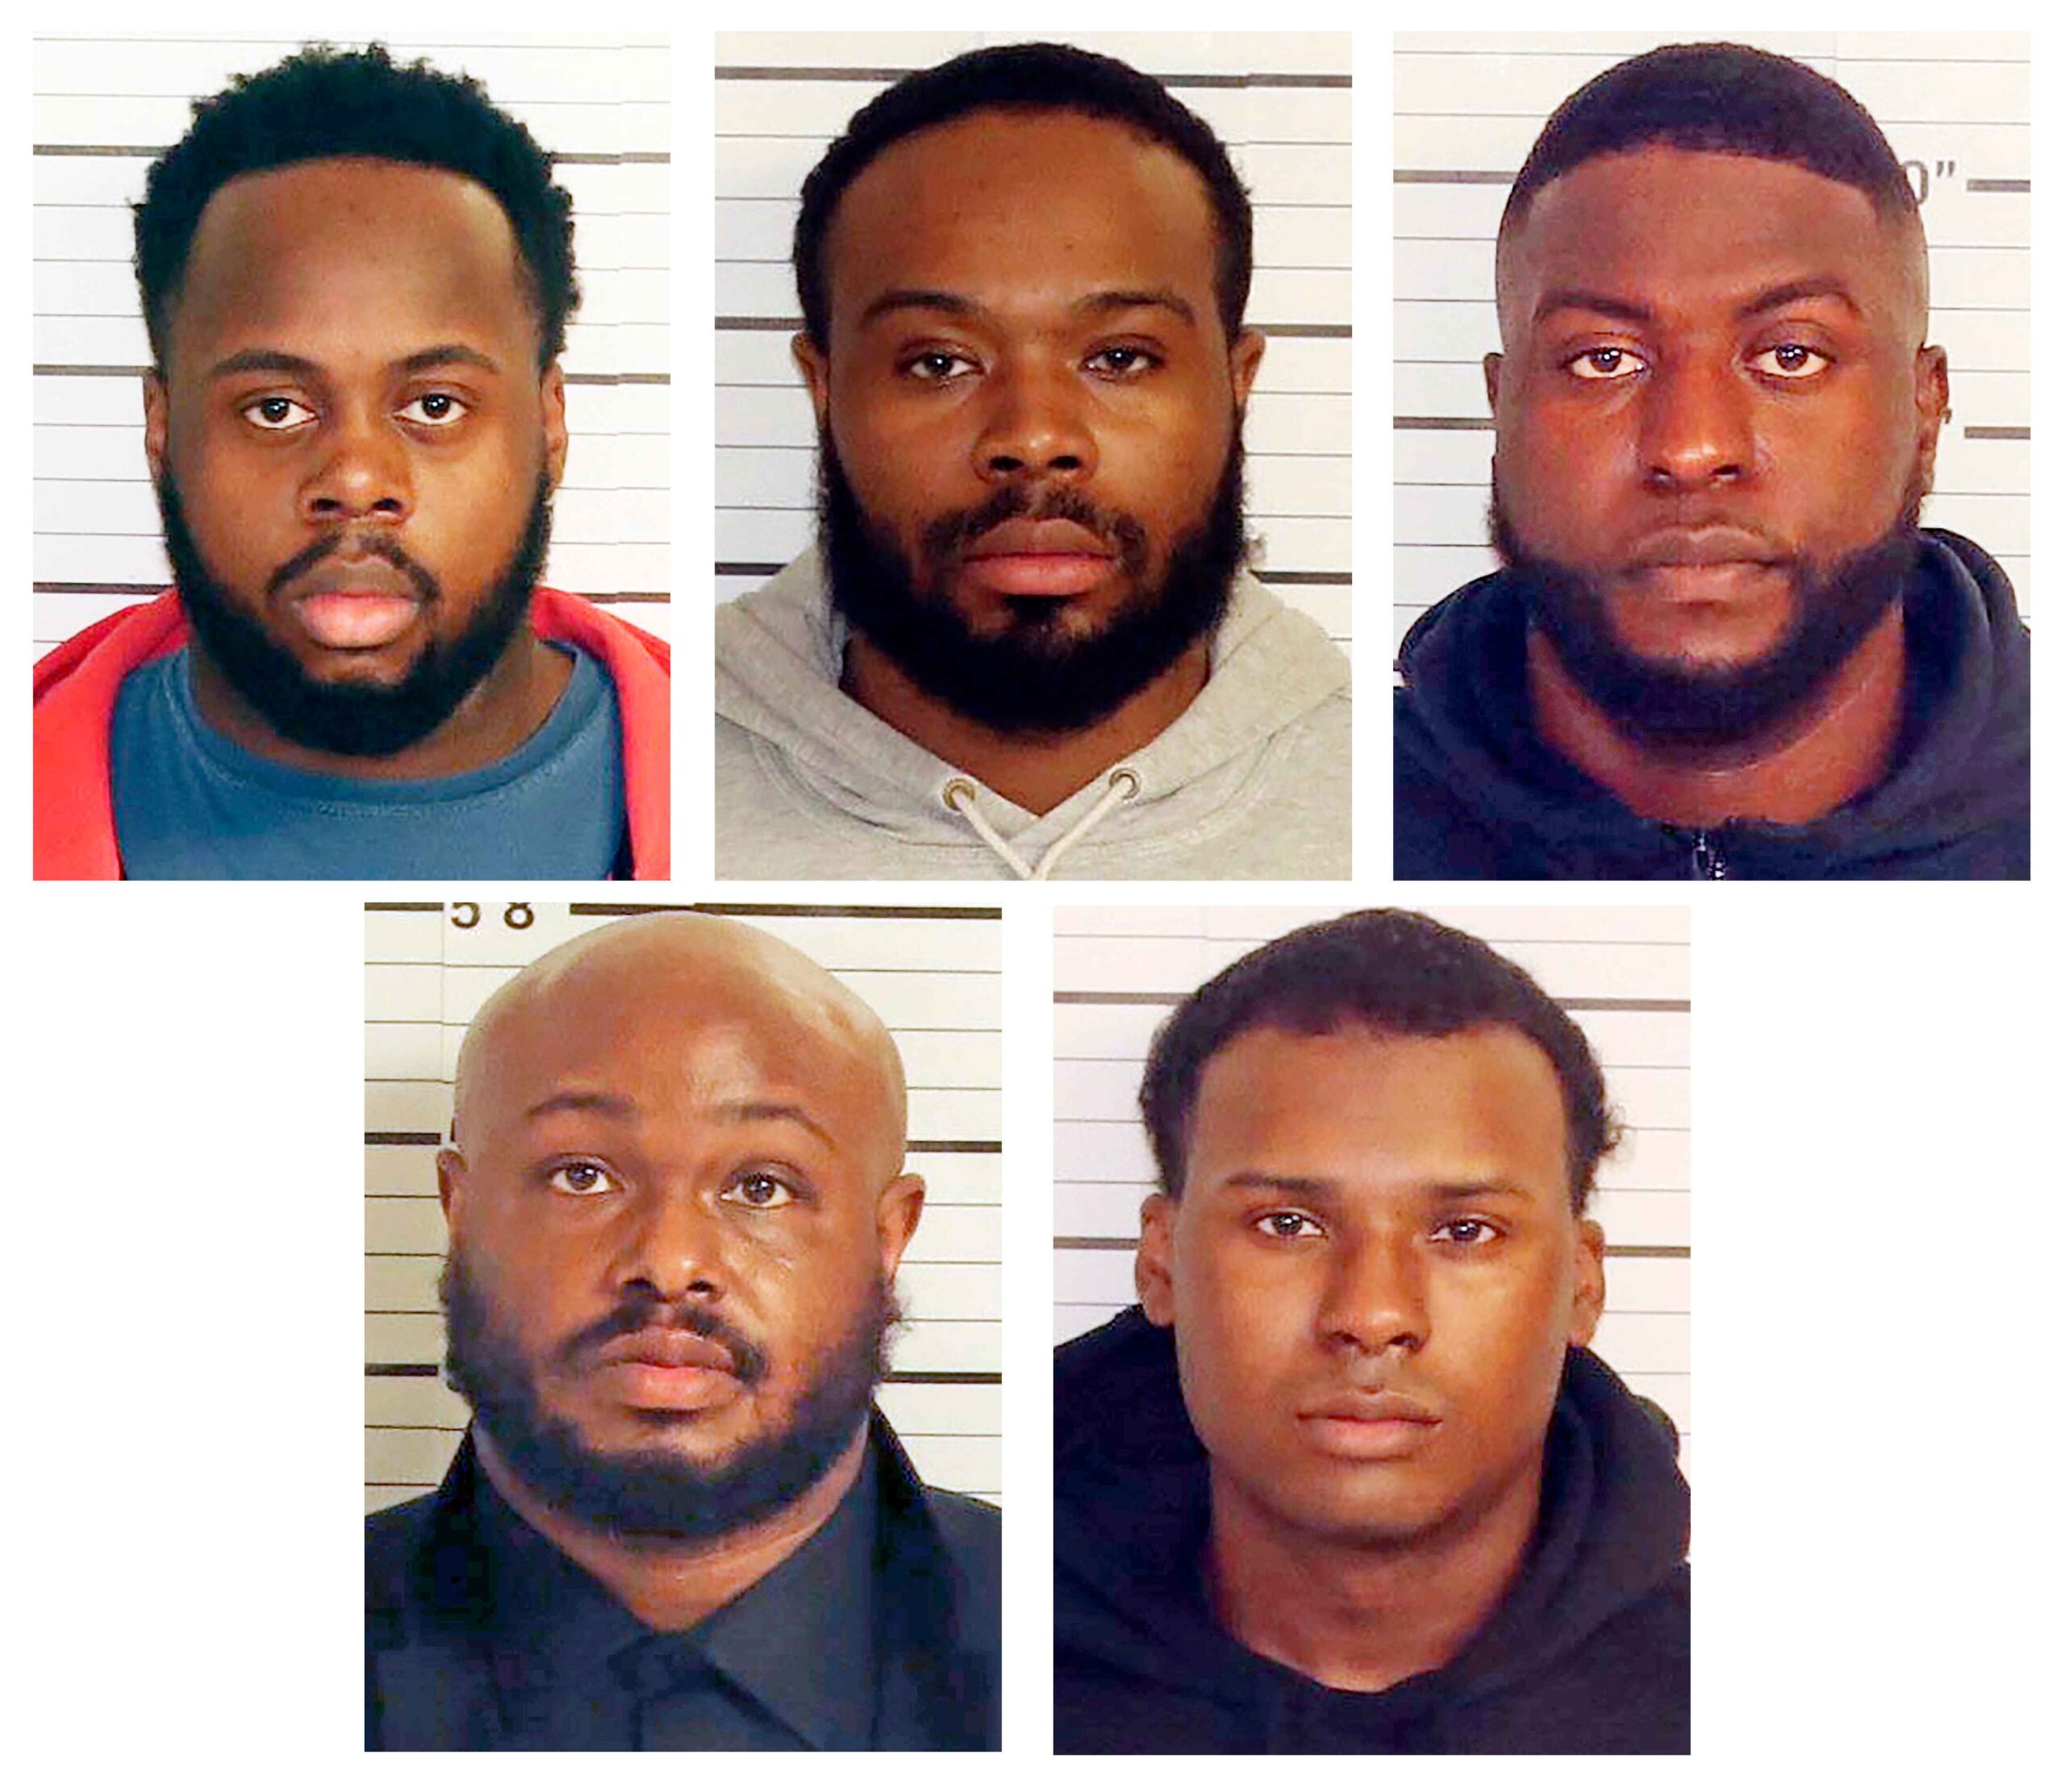 A grand jury indicted five former Memphis police officers for obstruction and civil rights violations in connection with the beating death of Tyre Nichols. (Shelby County Sheriff's Office via AP)